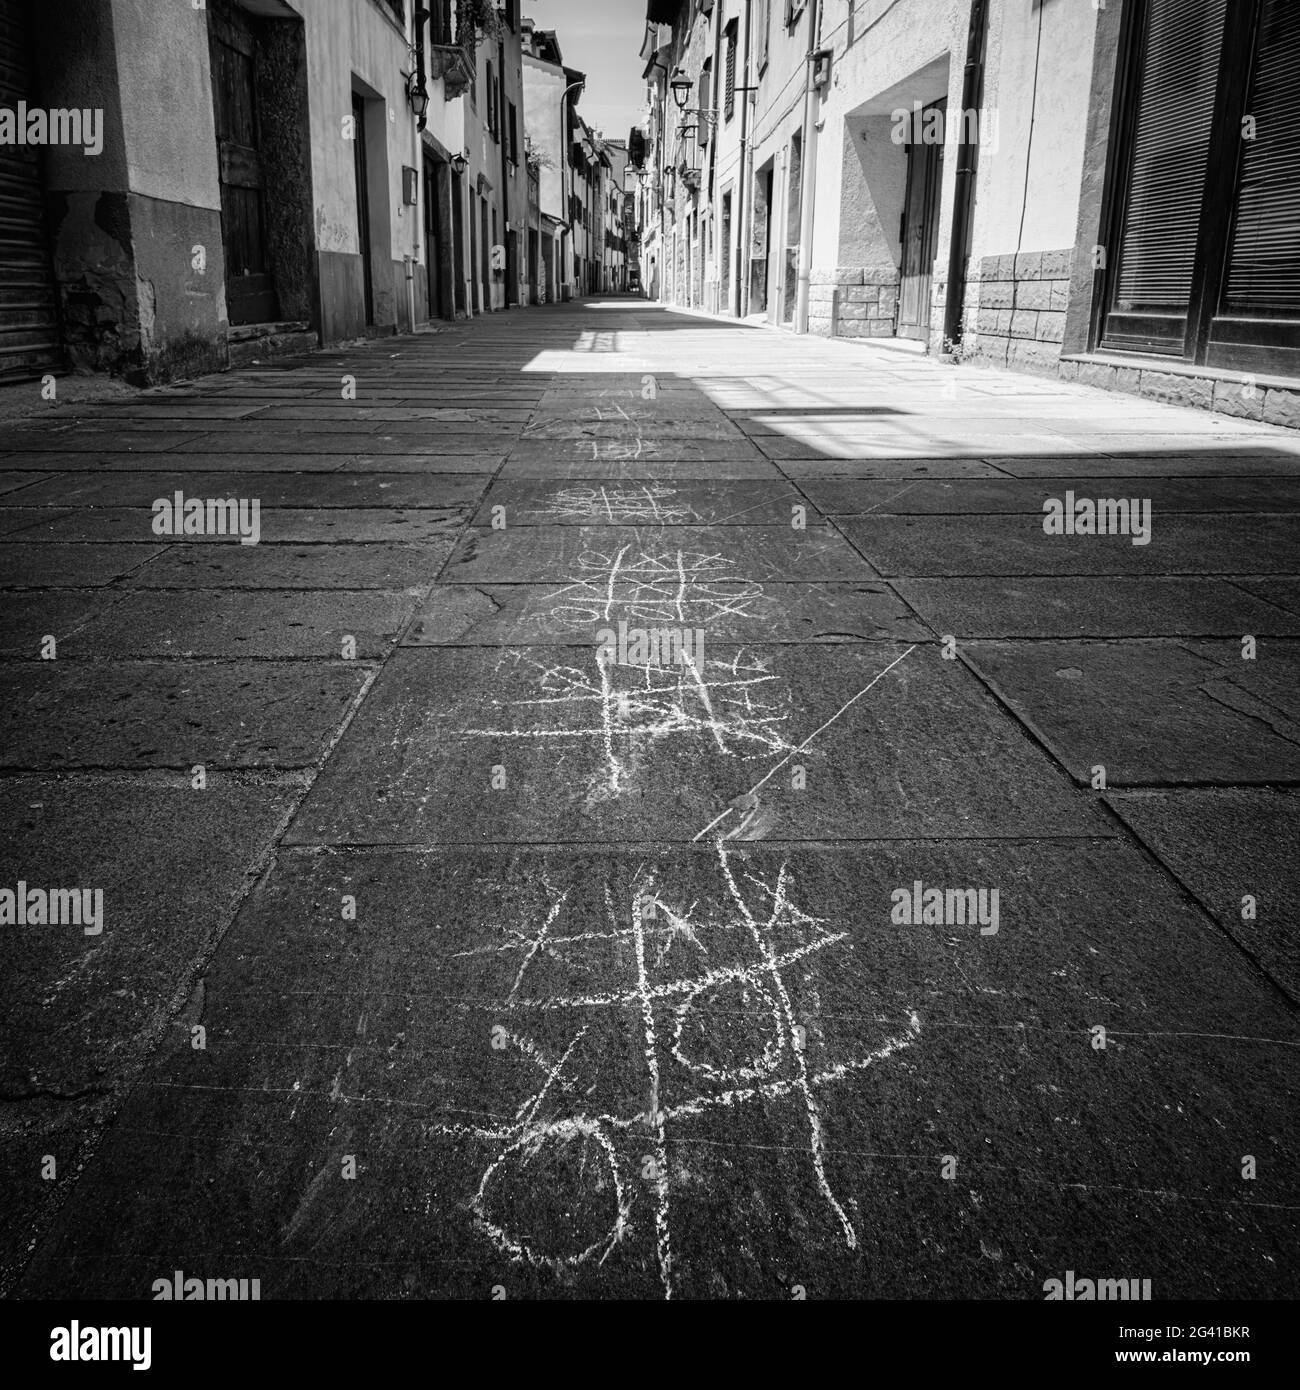 Muggia, Italy. June 13, 2021. the tic-tac-toe game drawn with chalk on the pavement of a narrow street in the town center Stock Photo